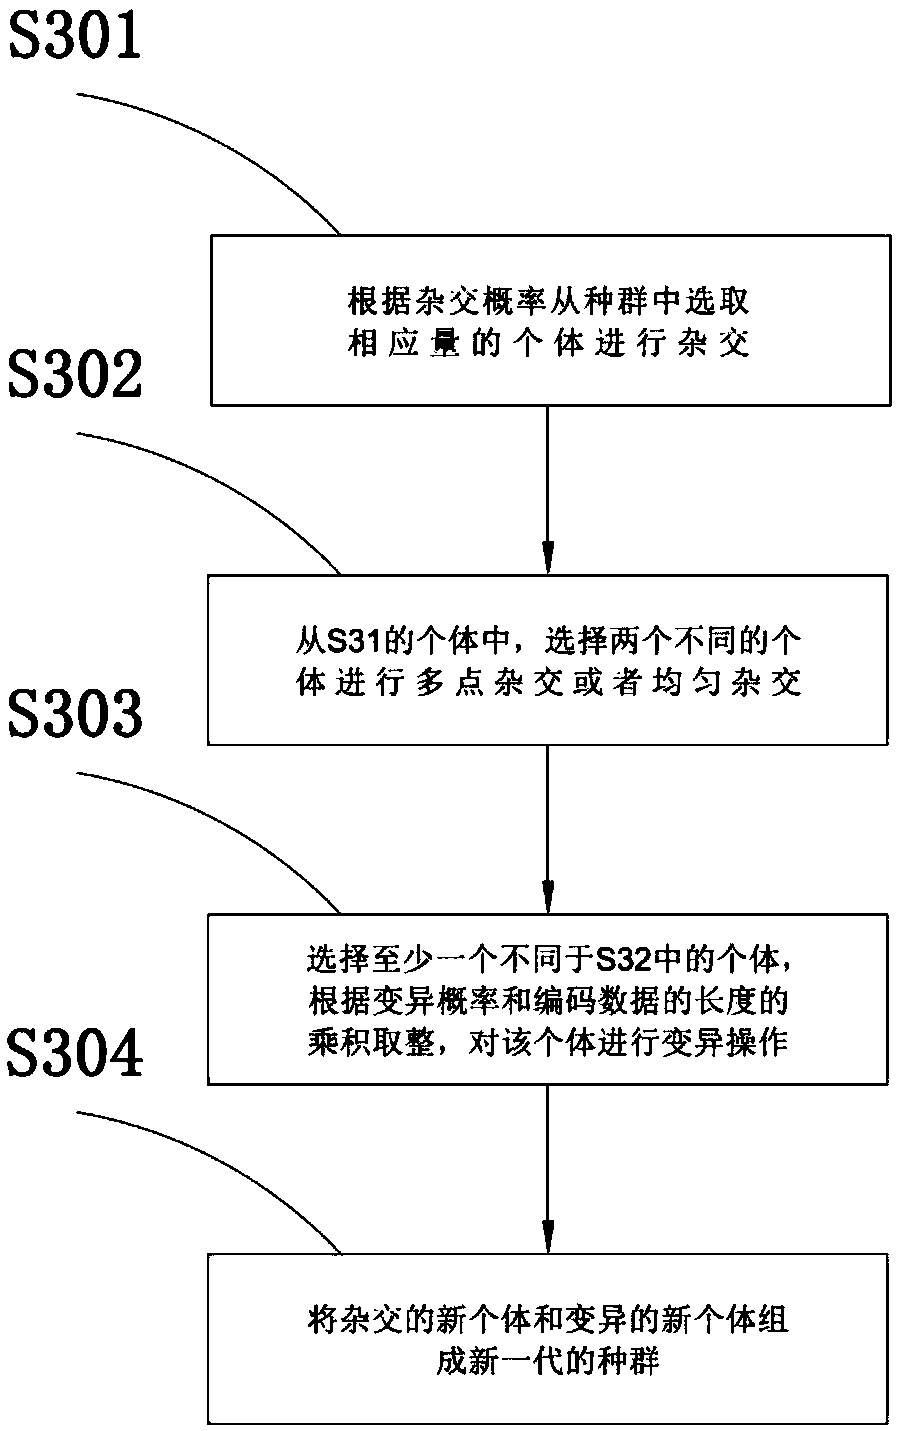 A ceramic product design system and a method thereof based on an interactive genetic algorithm